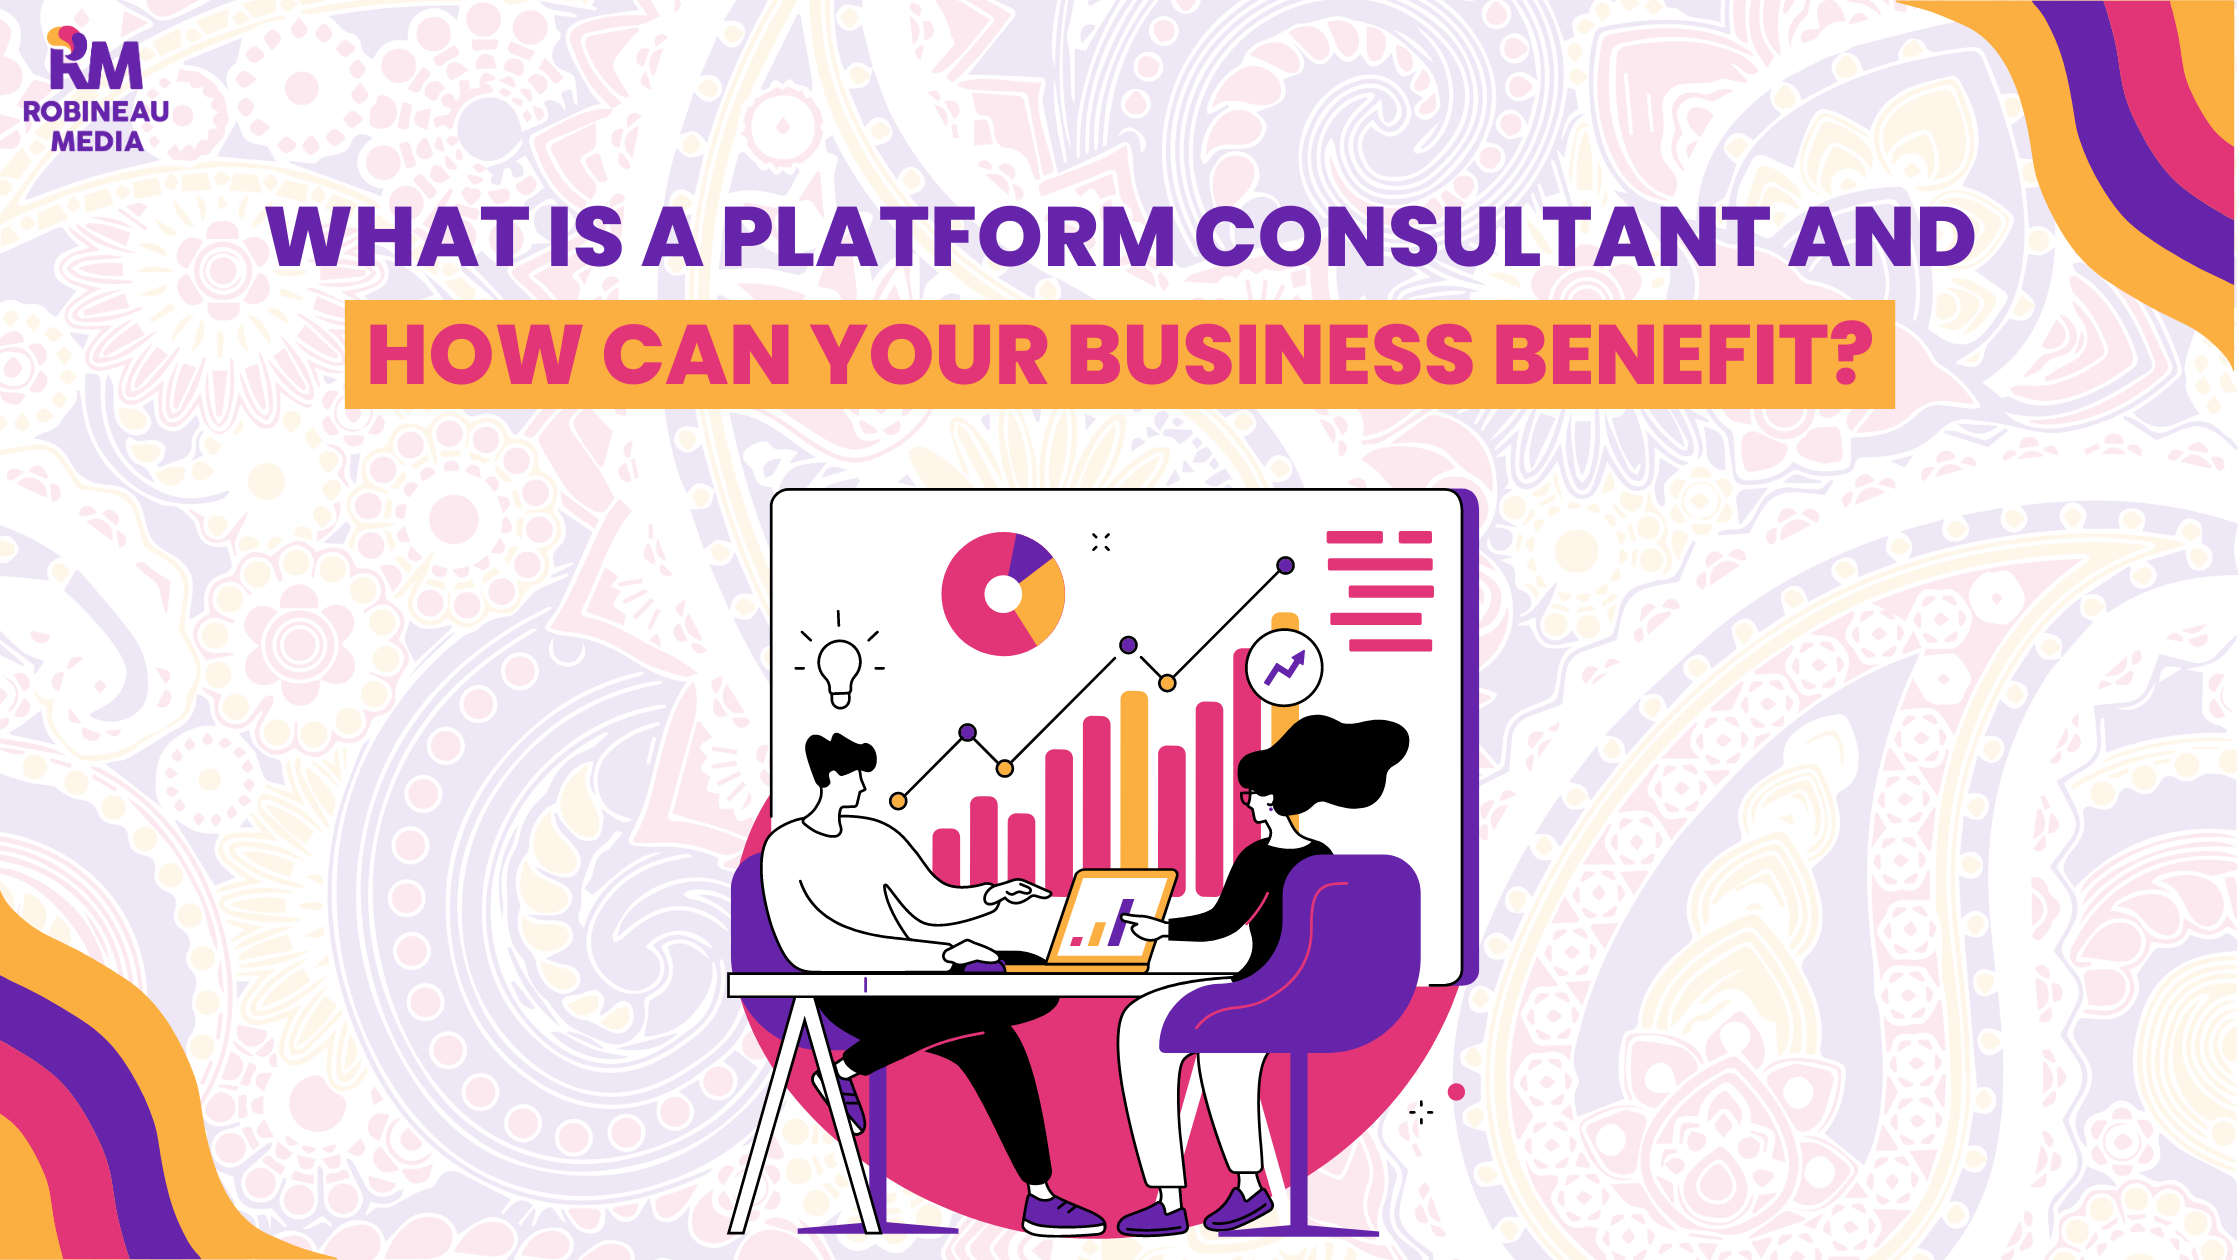 What is a Platform Consultant and How Can Your Business Benefit?